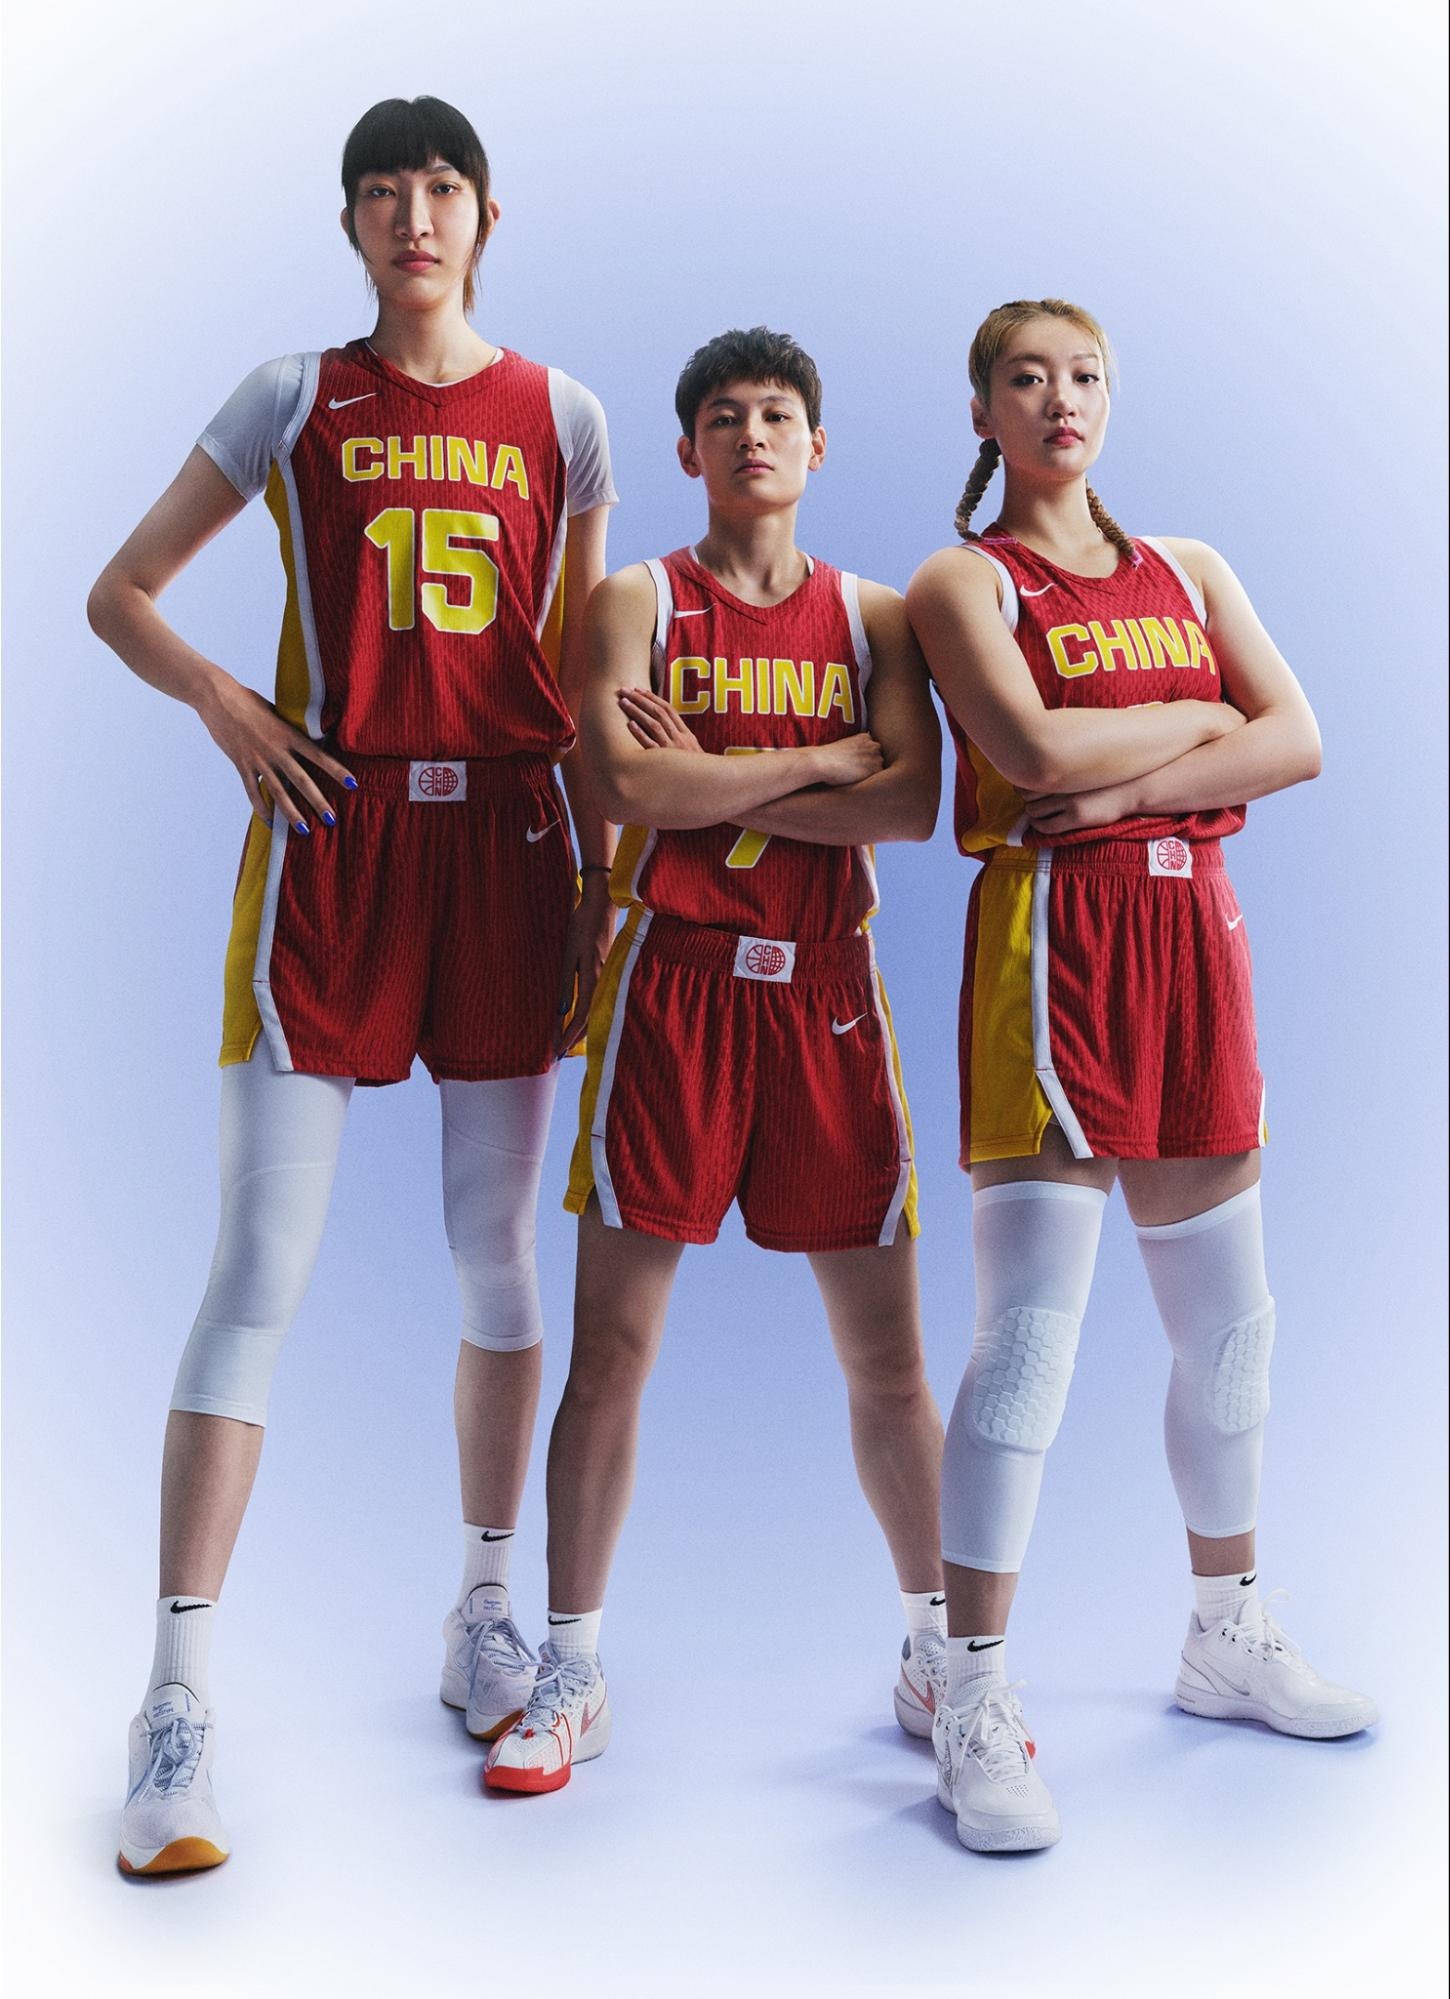 Nike has sponsored the China national men’s and women’s basketball teams since 1996 along with grassroots programs. Image: Nike